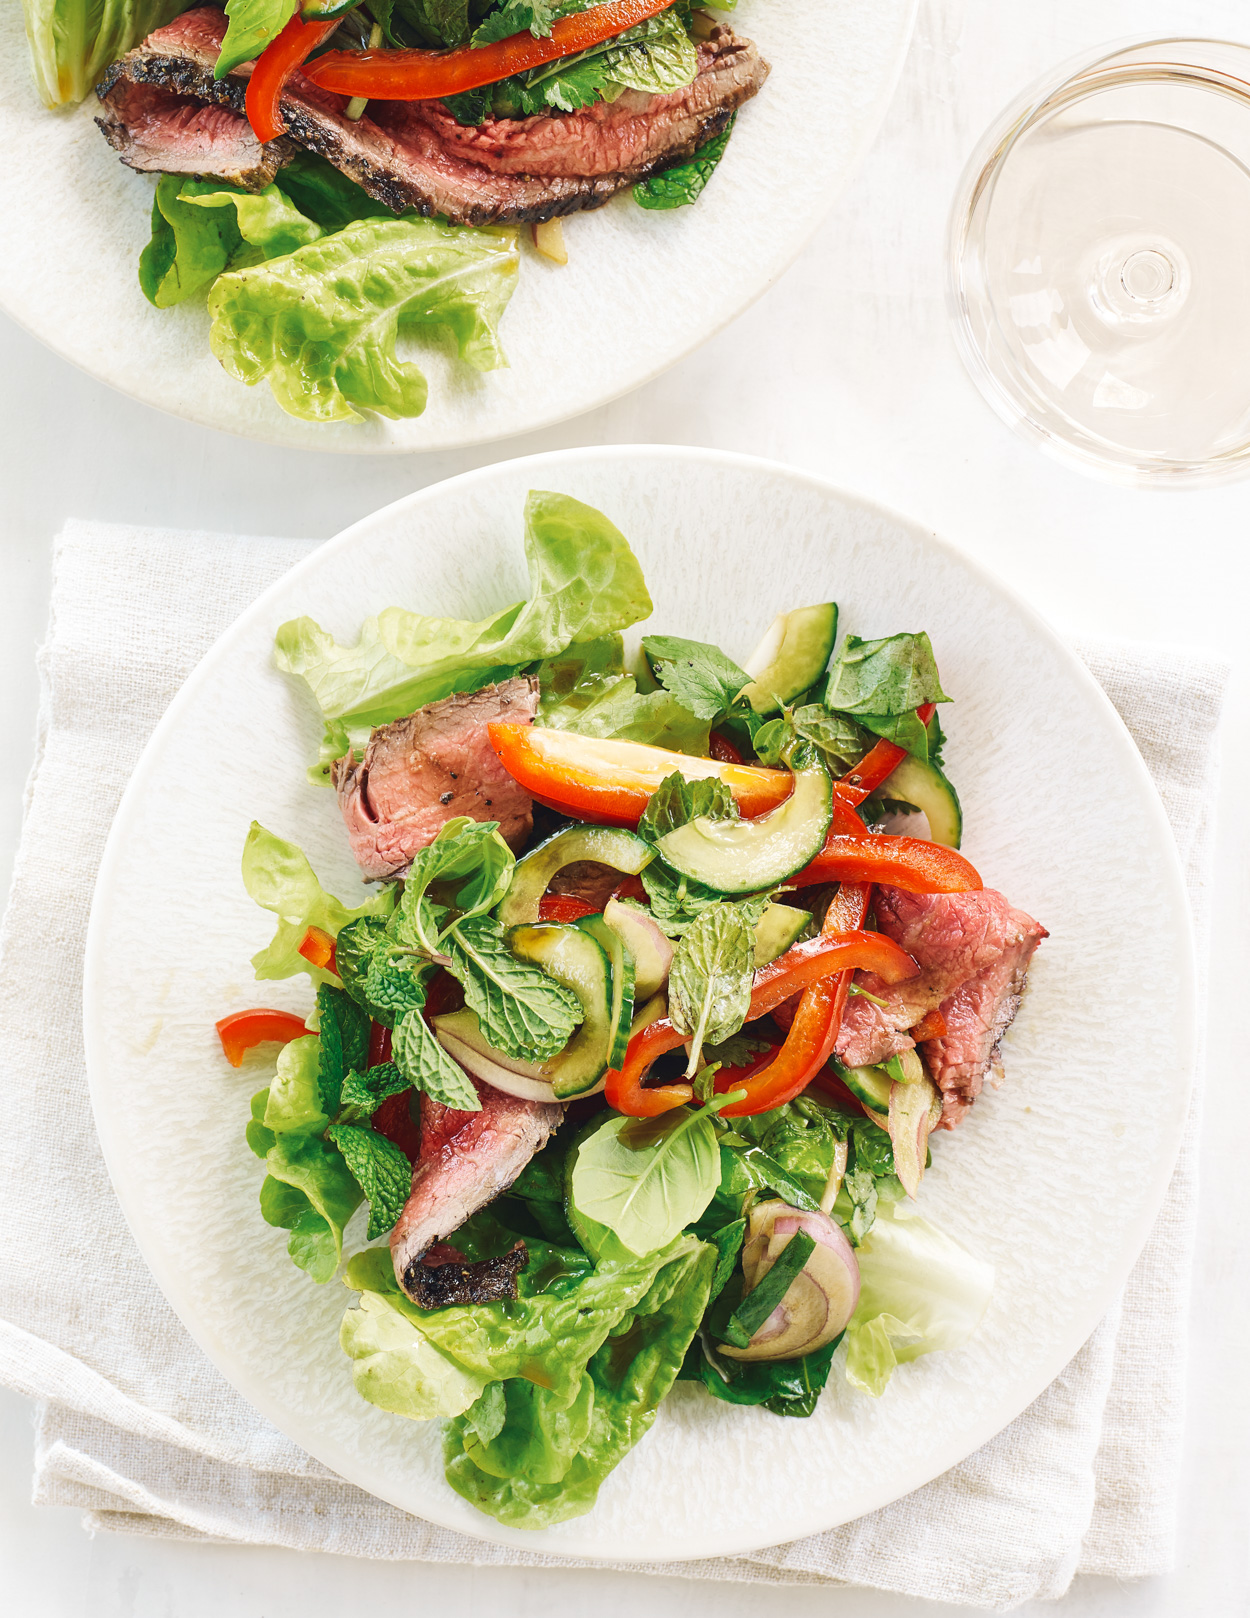 Los Angeles Food photographer - Cooking in Season  Cookbook thai beef salad  by Ray Kachatorian